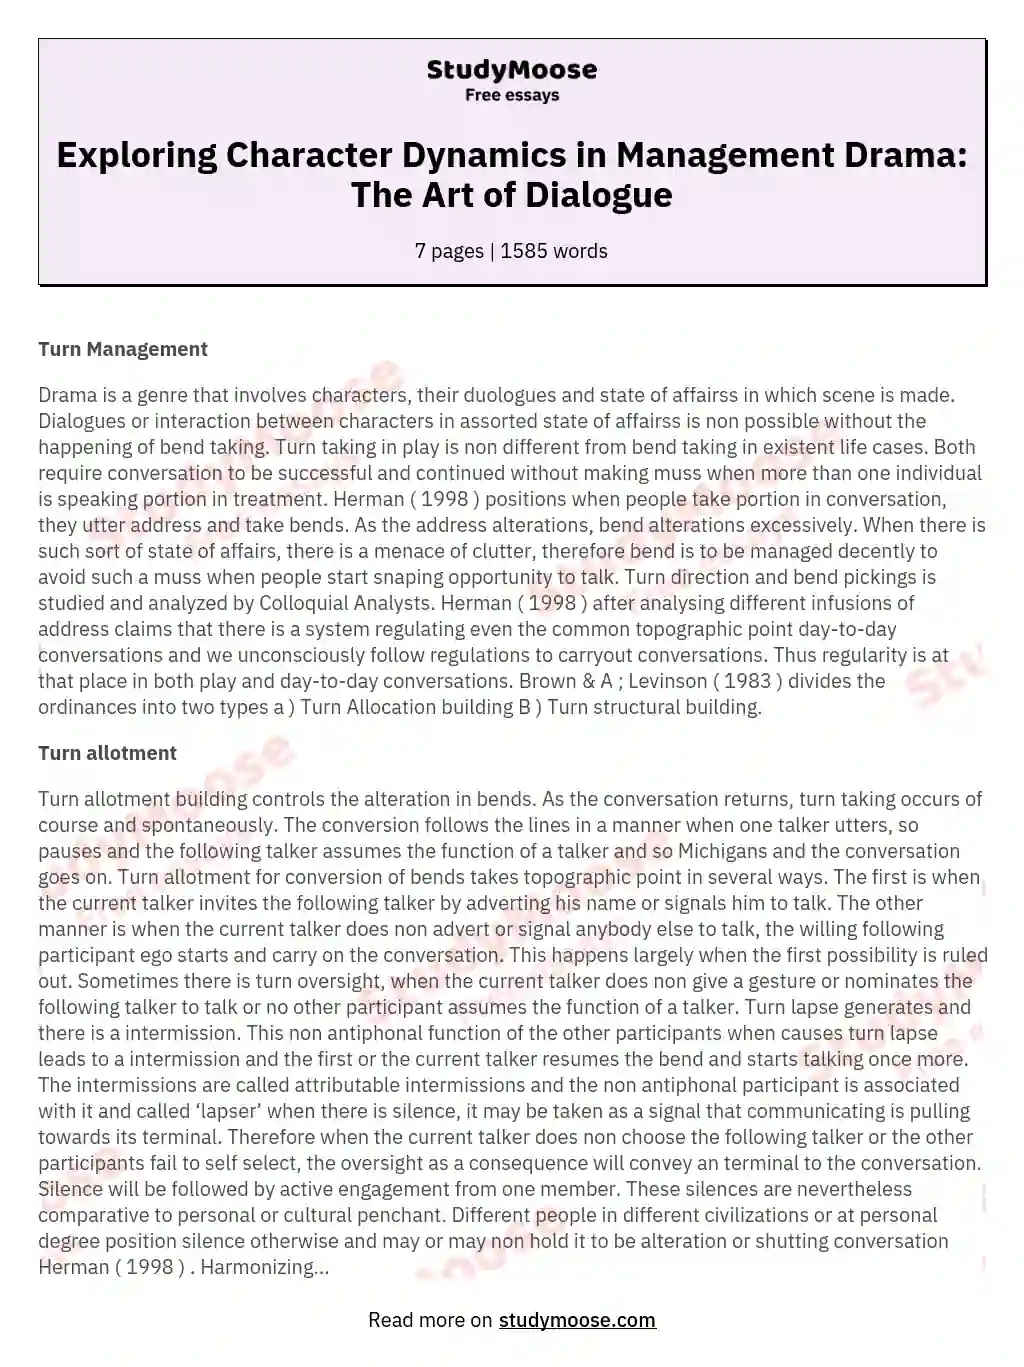 Exploring Character Dynamics in Management Drama: The Art of Dialogue essay